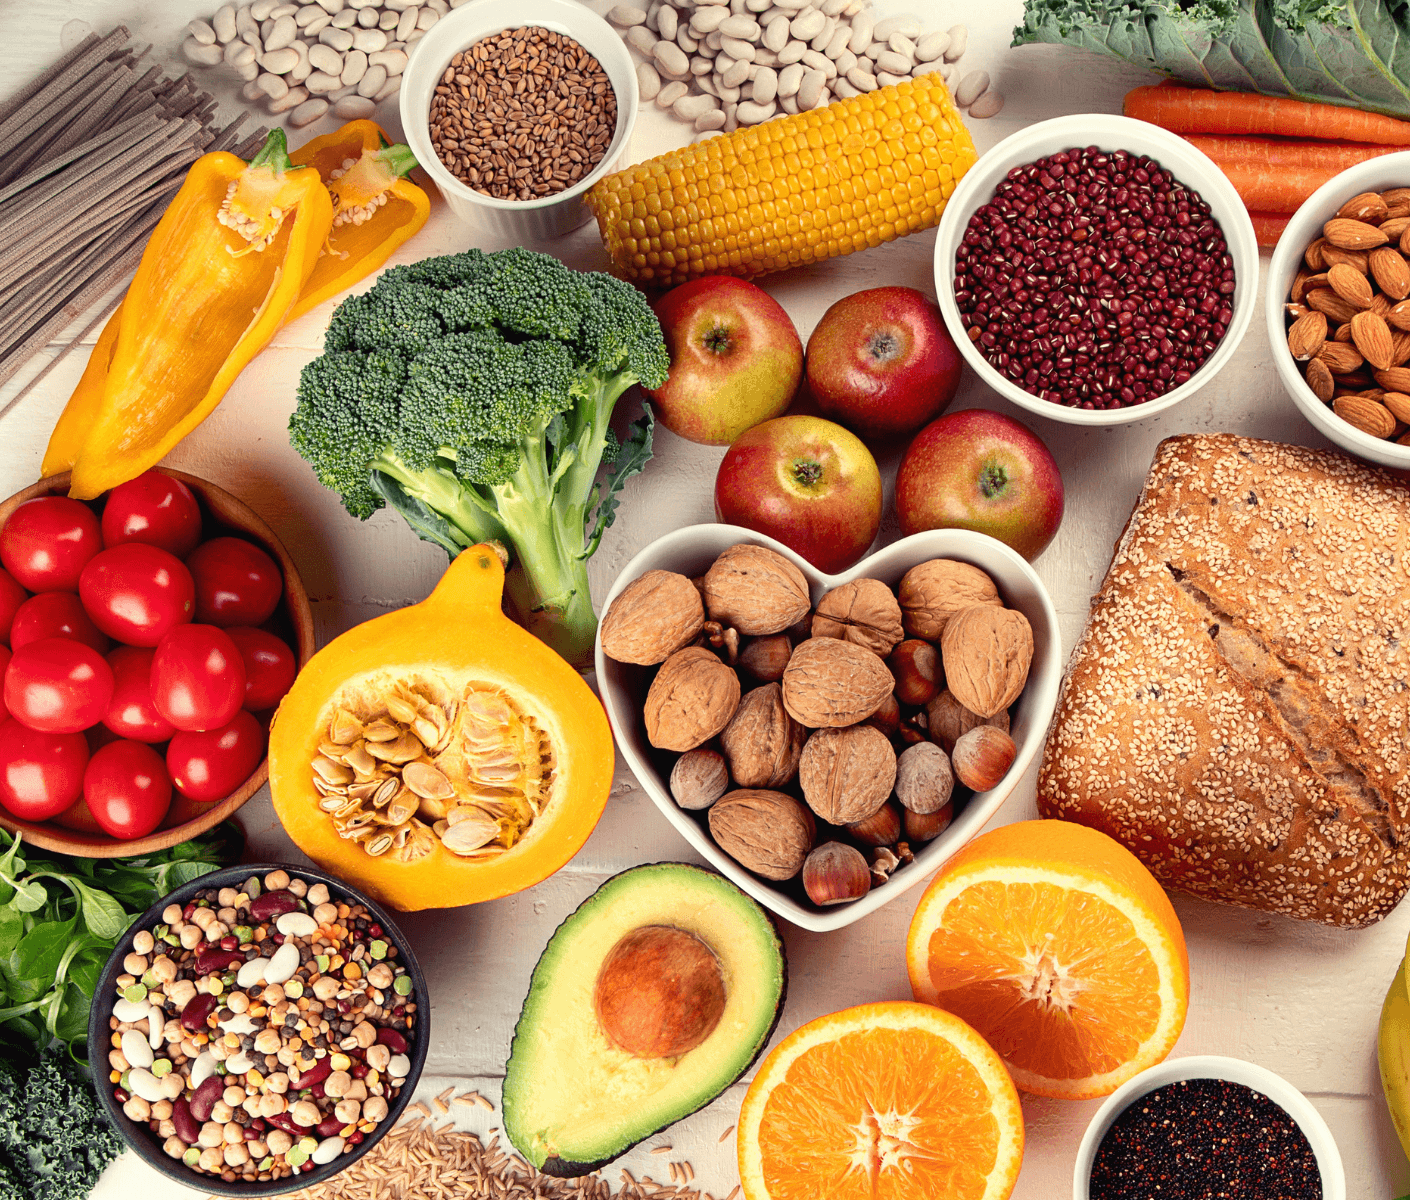 Why Eat More Fiber and Whole Foods?